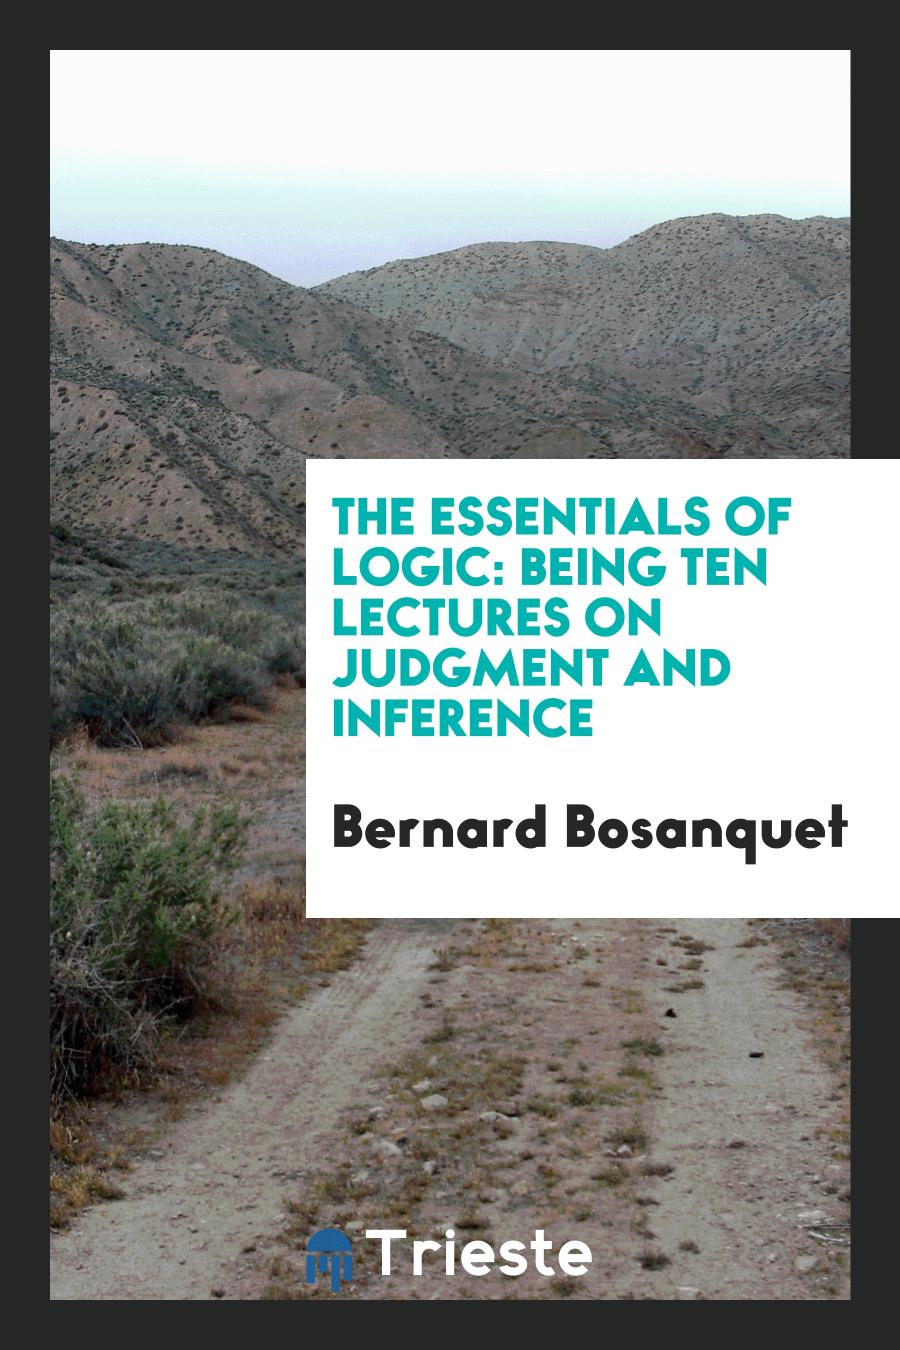 Bernard Bosanquet - The Essentials of Logic: Being Ten Lectures on Judgment and Inference